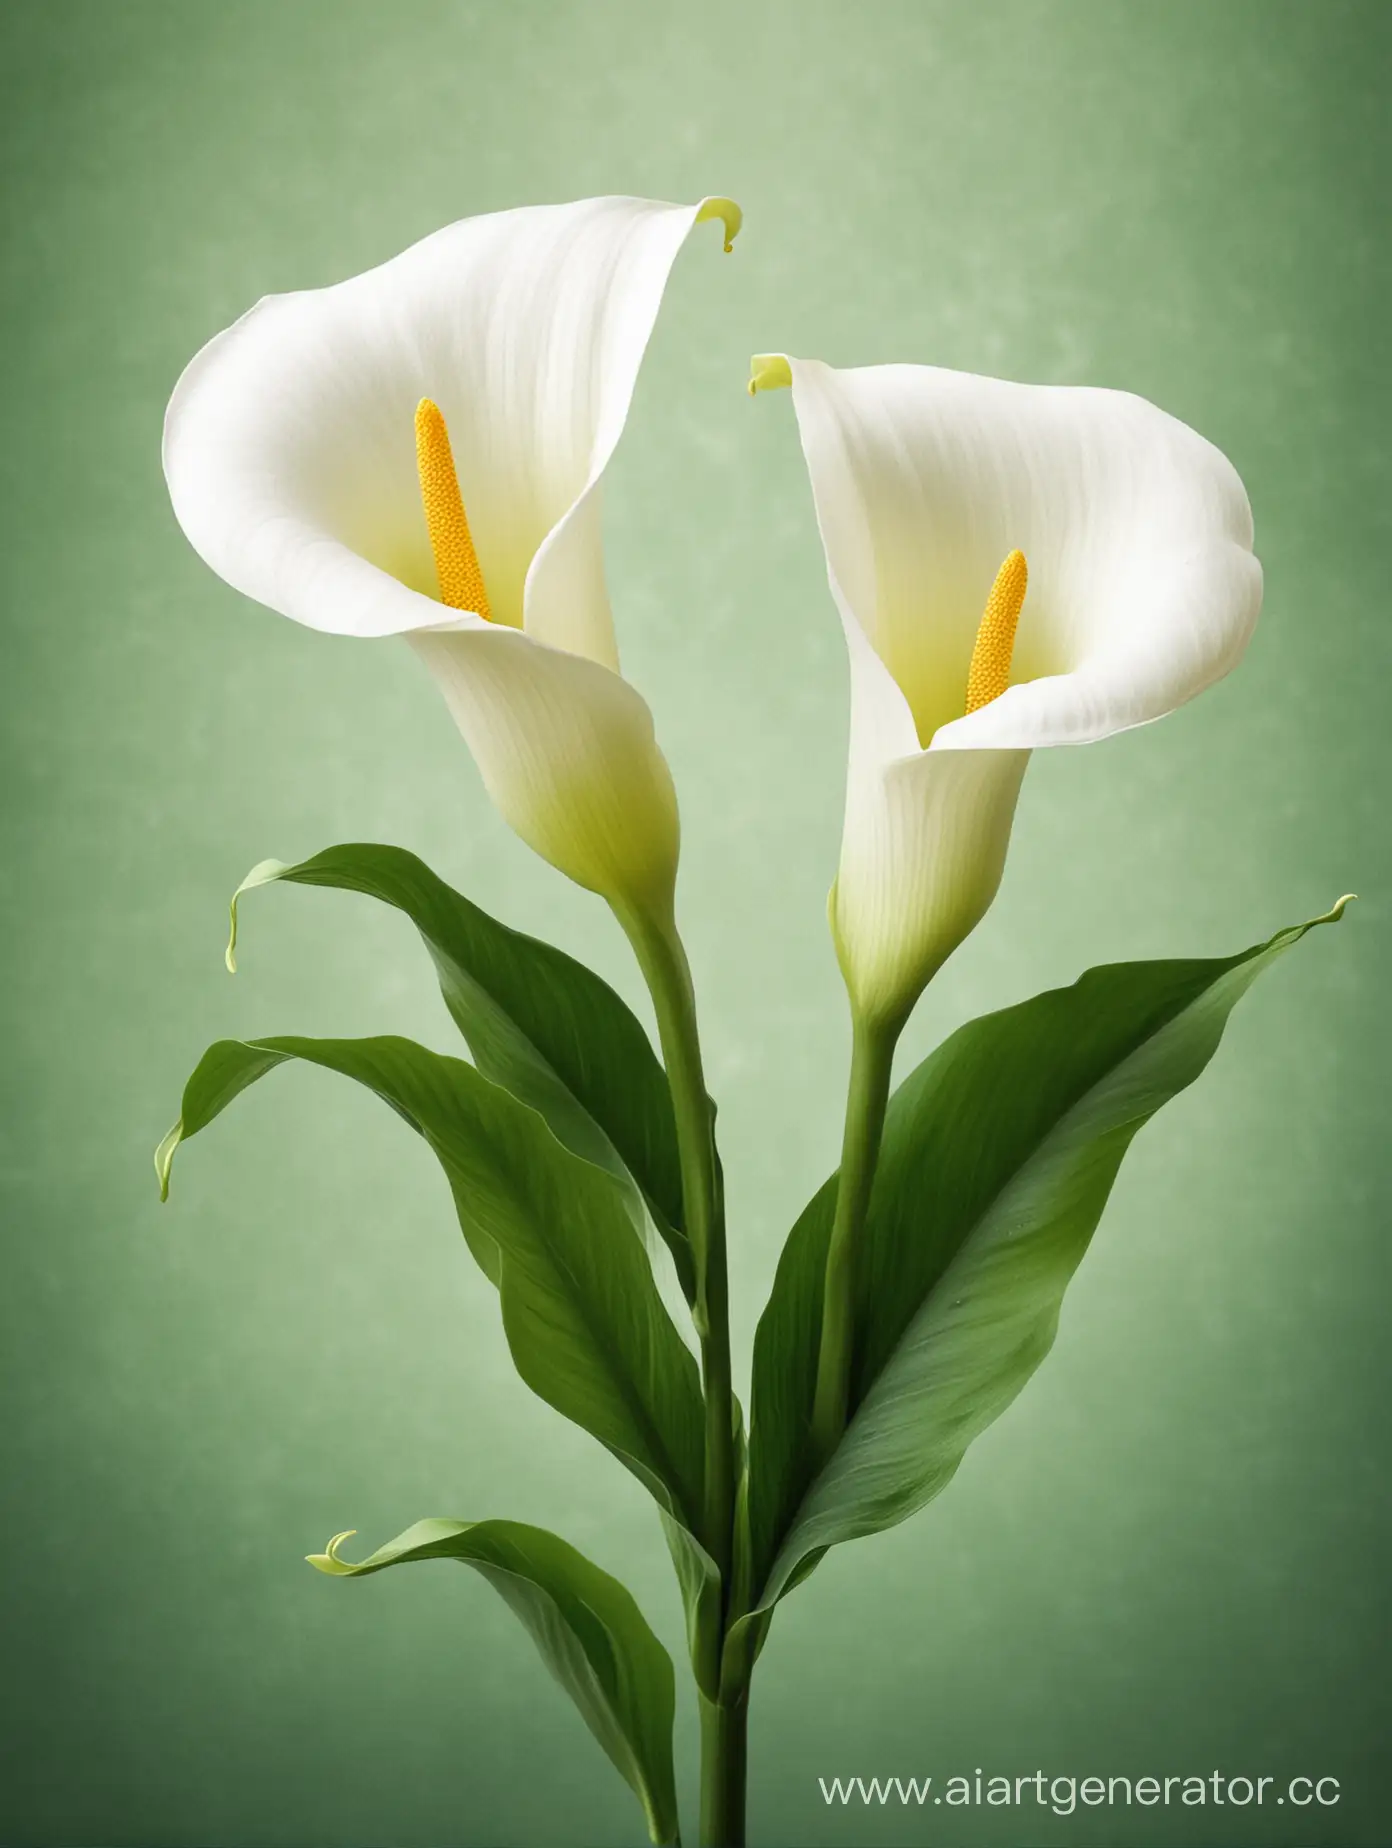 Vibrant-Calla-Lily-Flowers-on-Lush-Green-Background